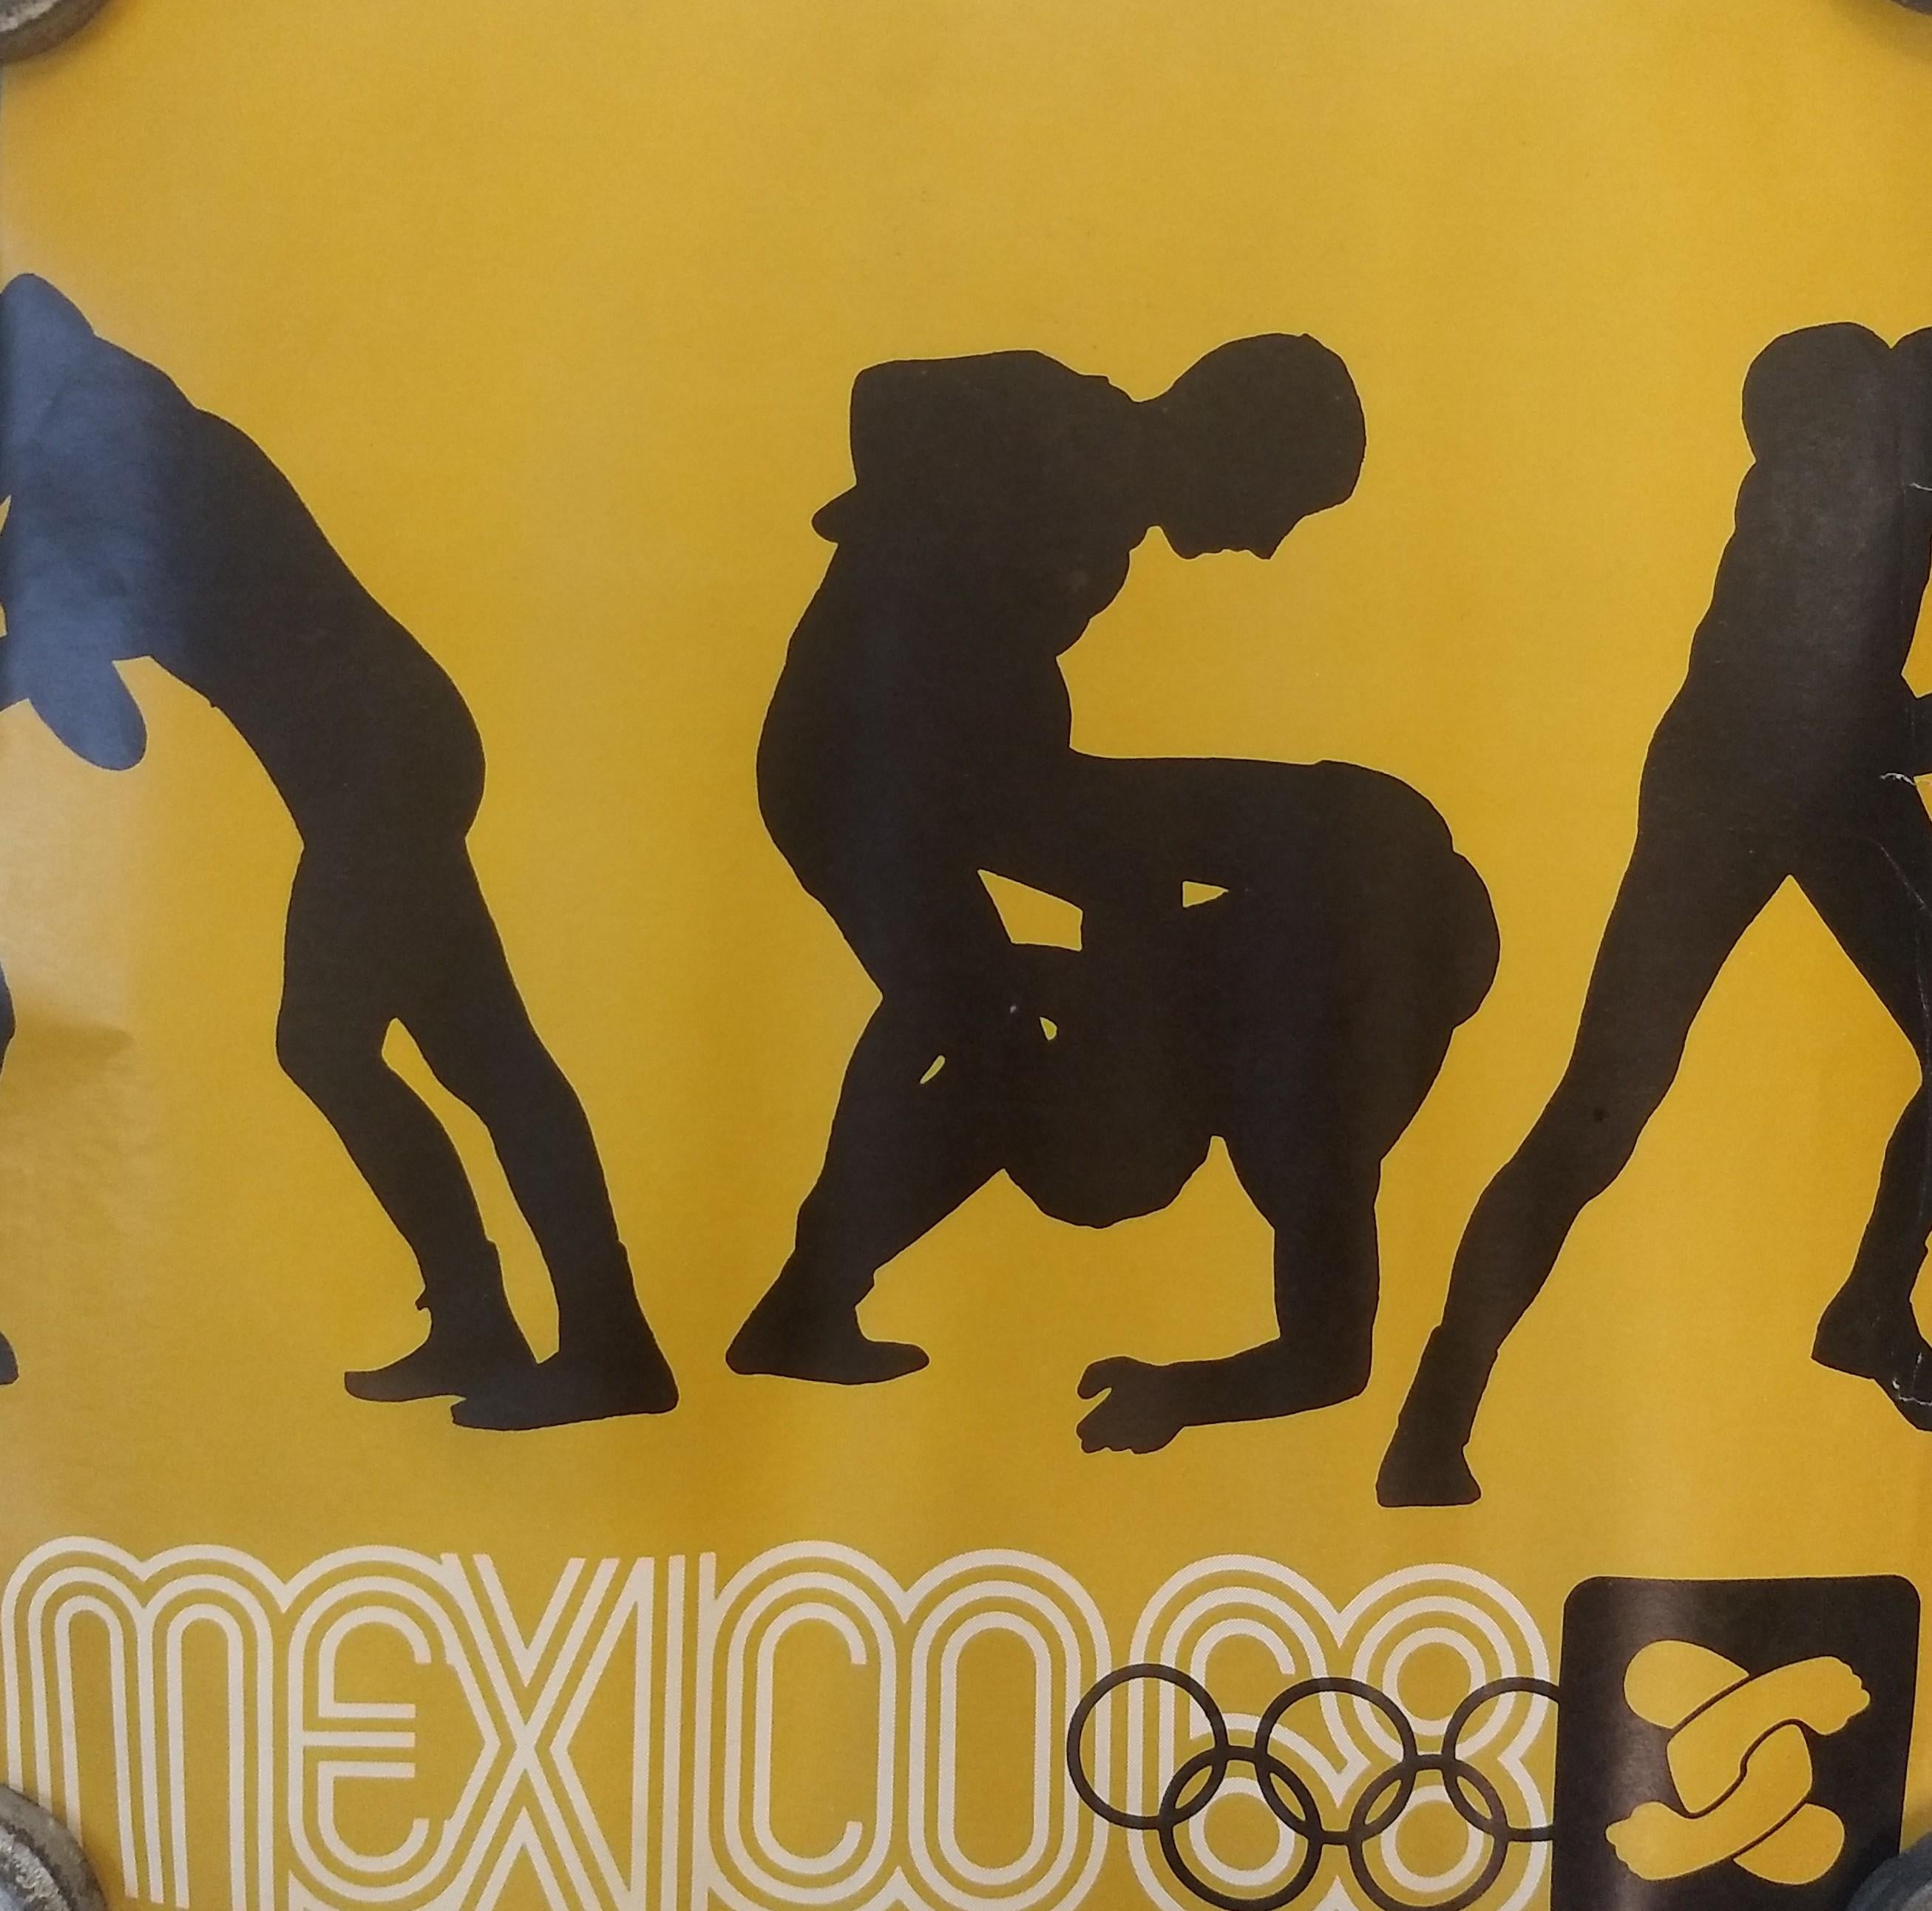 Paper Mexico 68 Olympics Original Posters with Pictograms for Each Sport Discipline For Sale